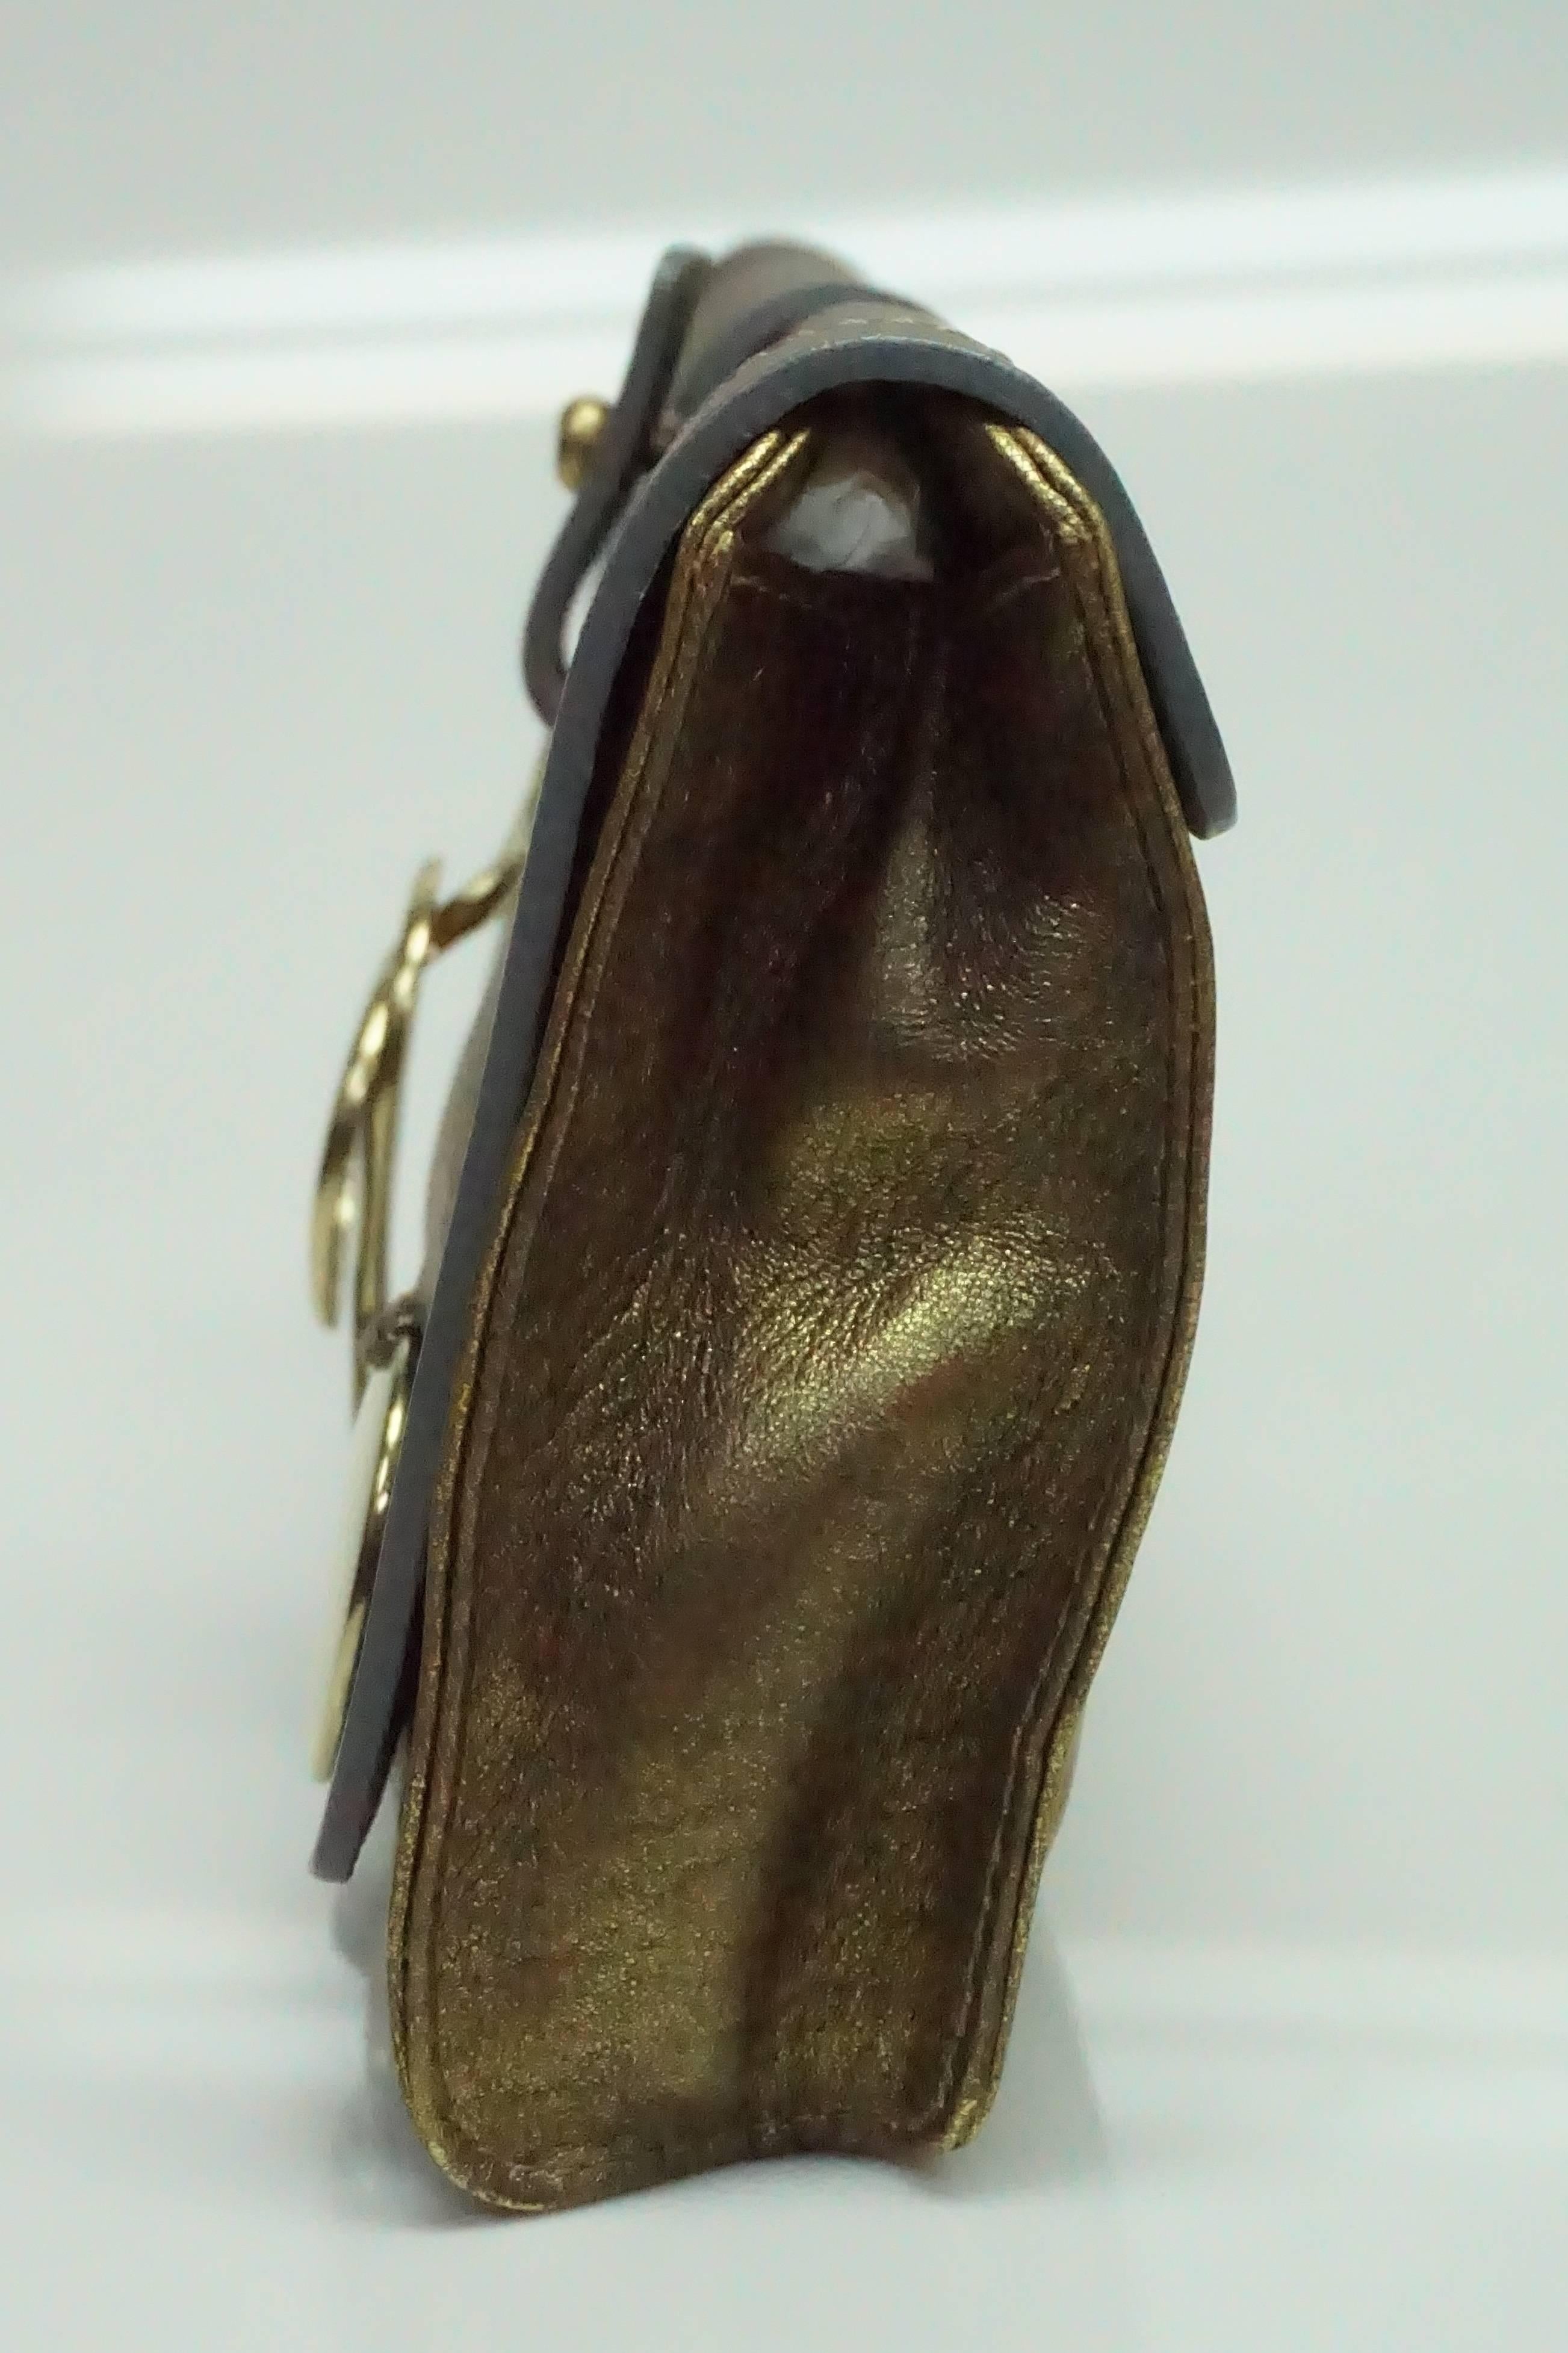 Chloe Bronze Metallic Clutch. This fabulous clutch is in good condition. There are few scratches and smudges on the gold hardware. It has a single flap and buckle opening. The clutch is made of soft leather and has two coin-like plates on the front.